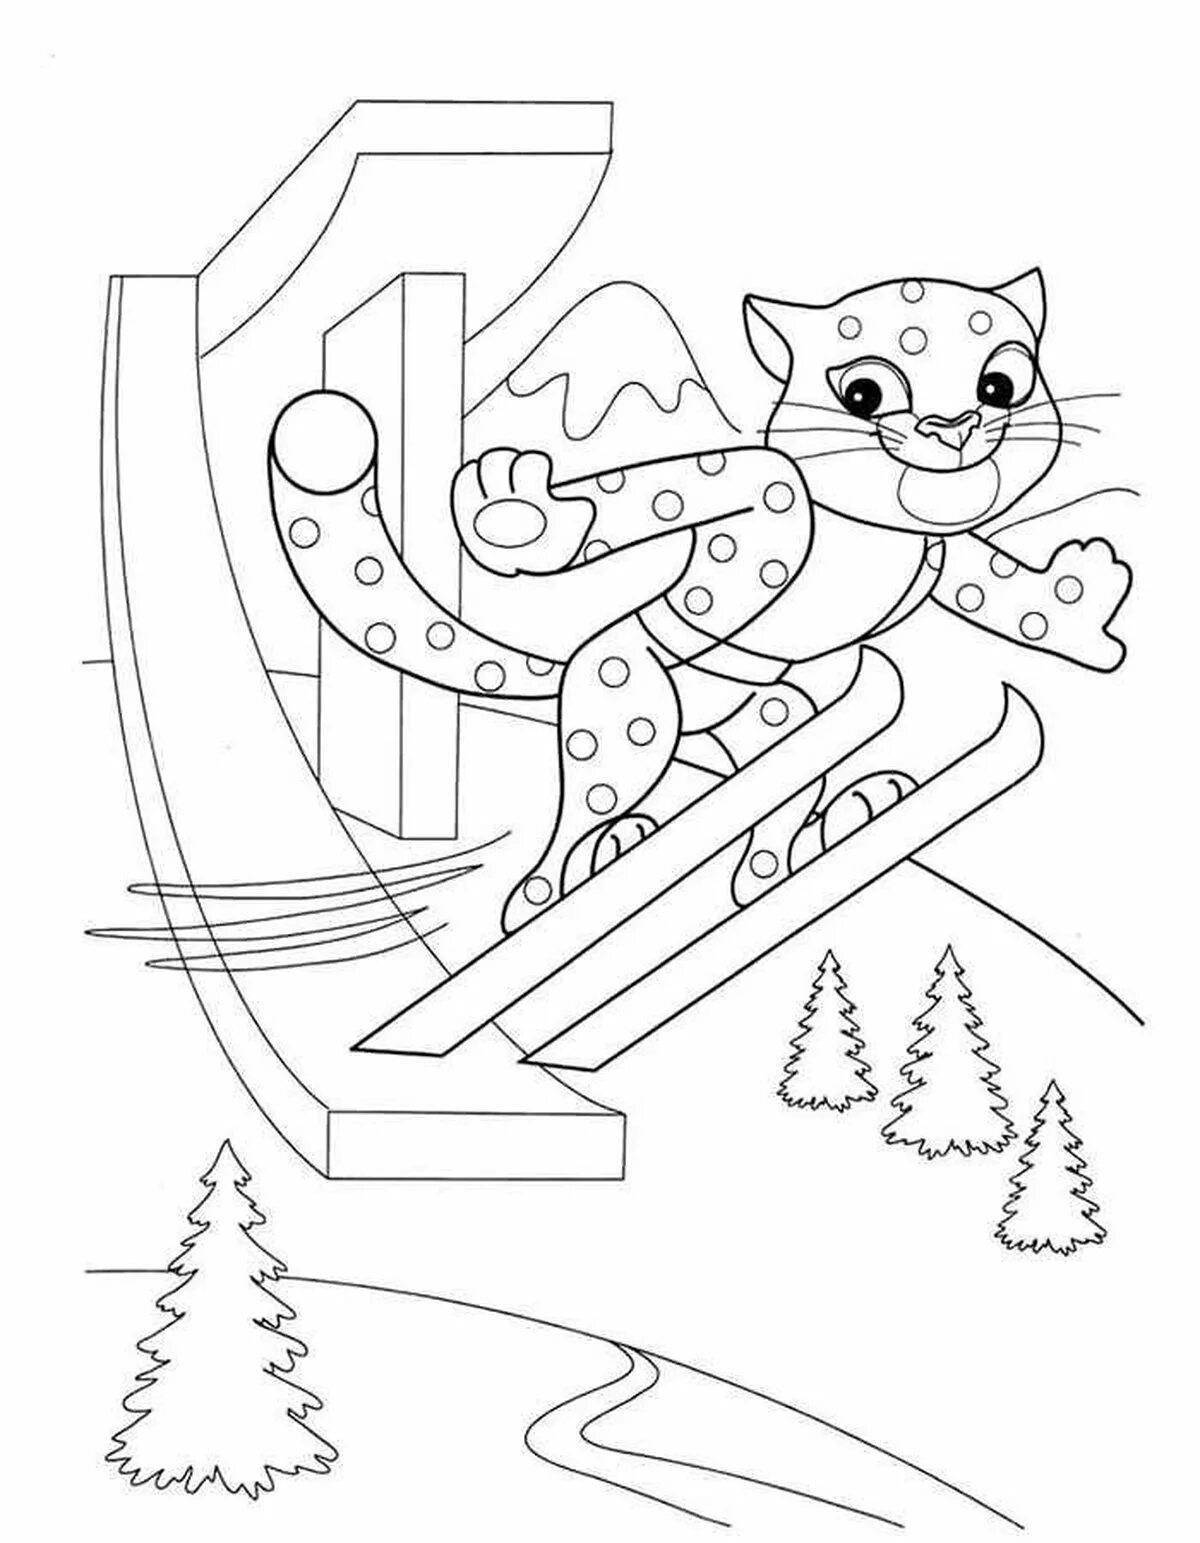 Luminous winter sports coloring book for 6-7 year olds